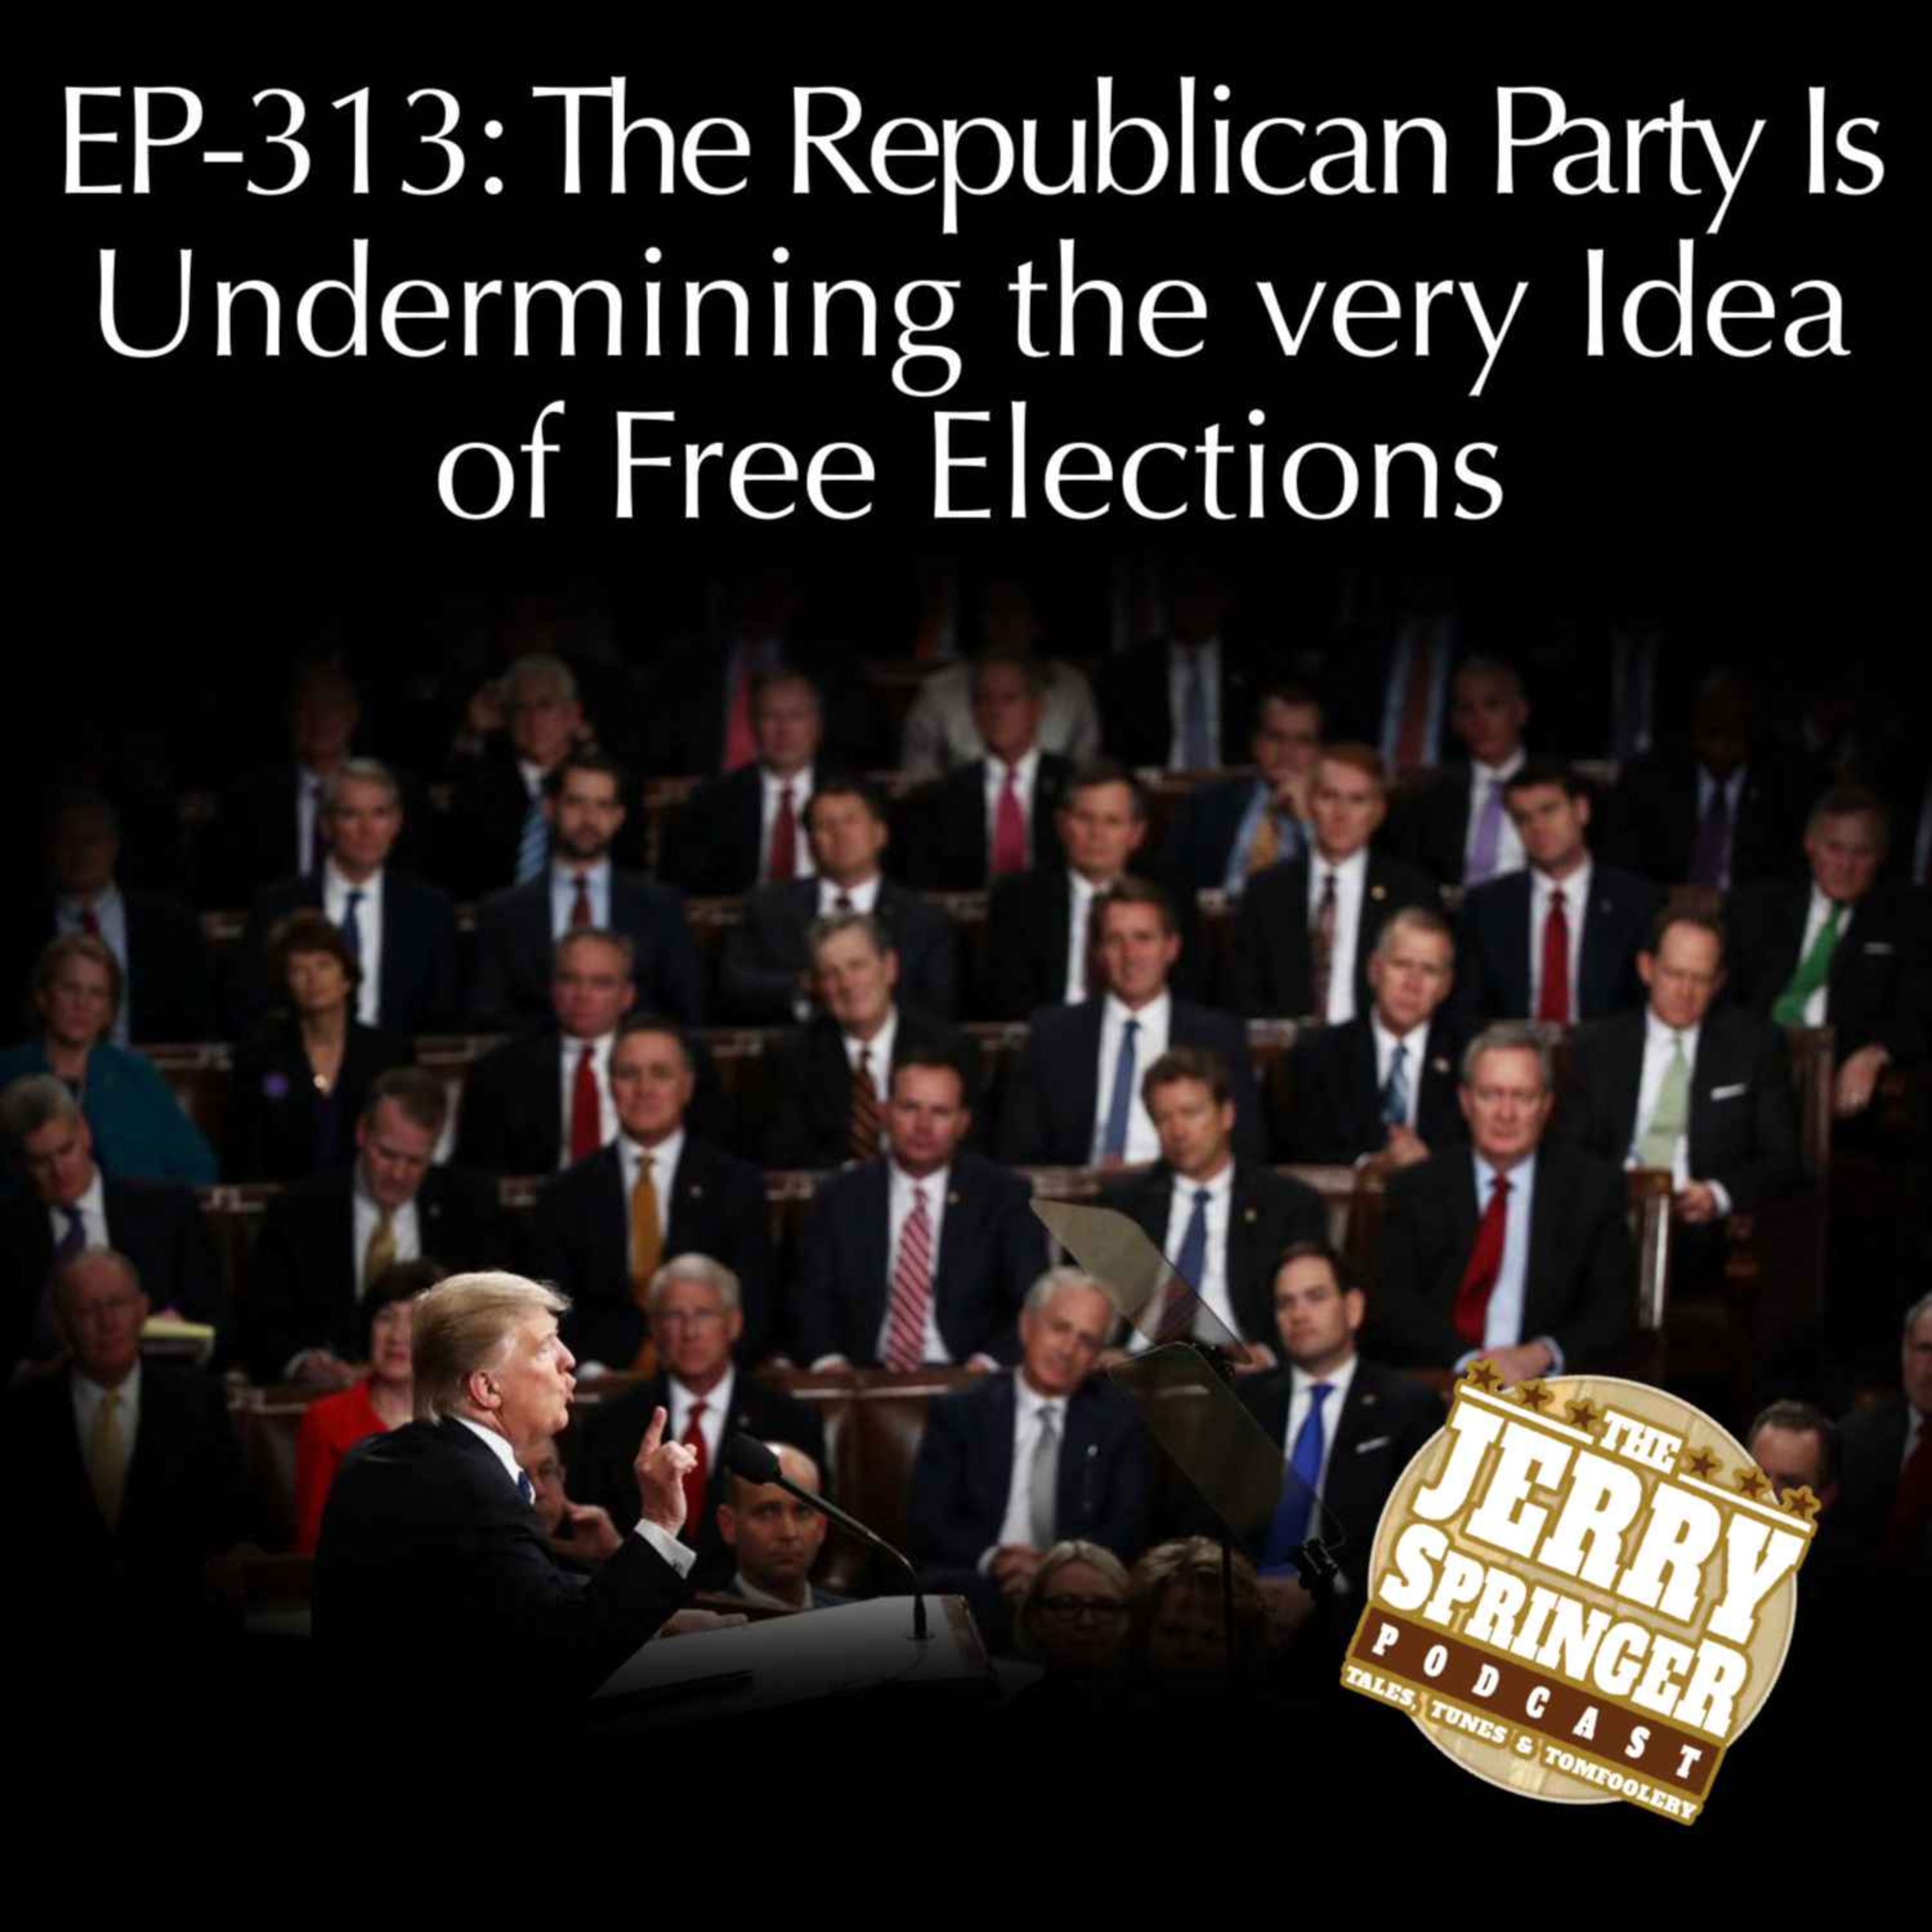 The Republican Party Is Undermining the very Idea of Free Elections: EP-313